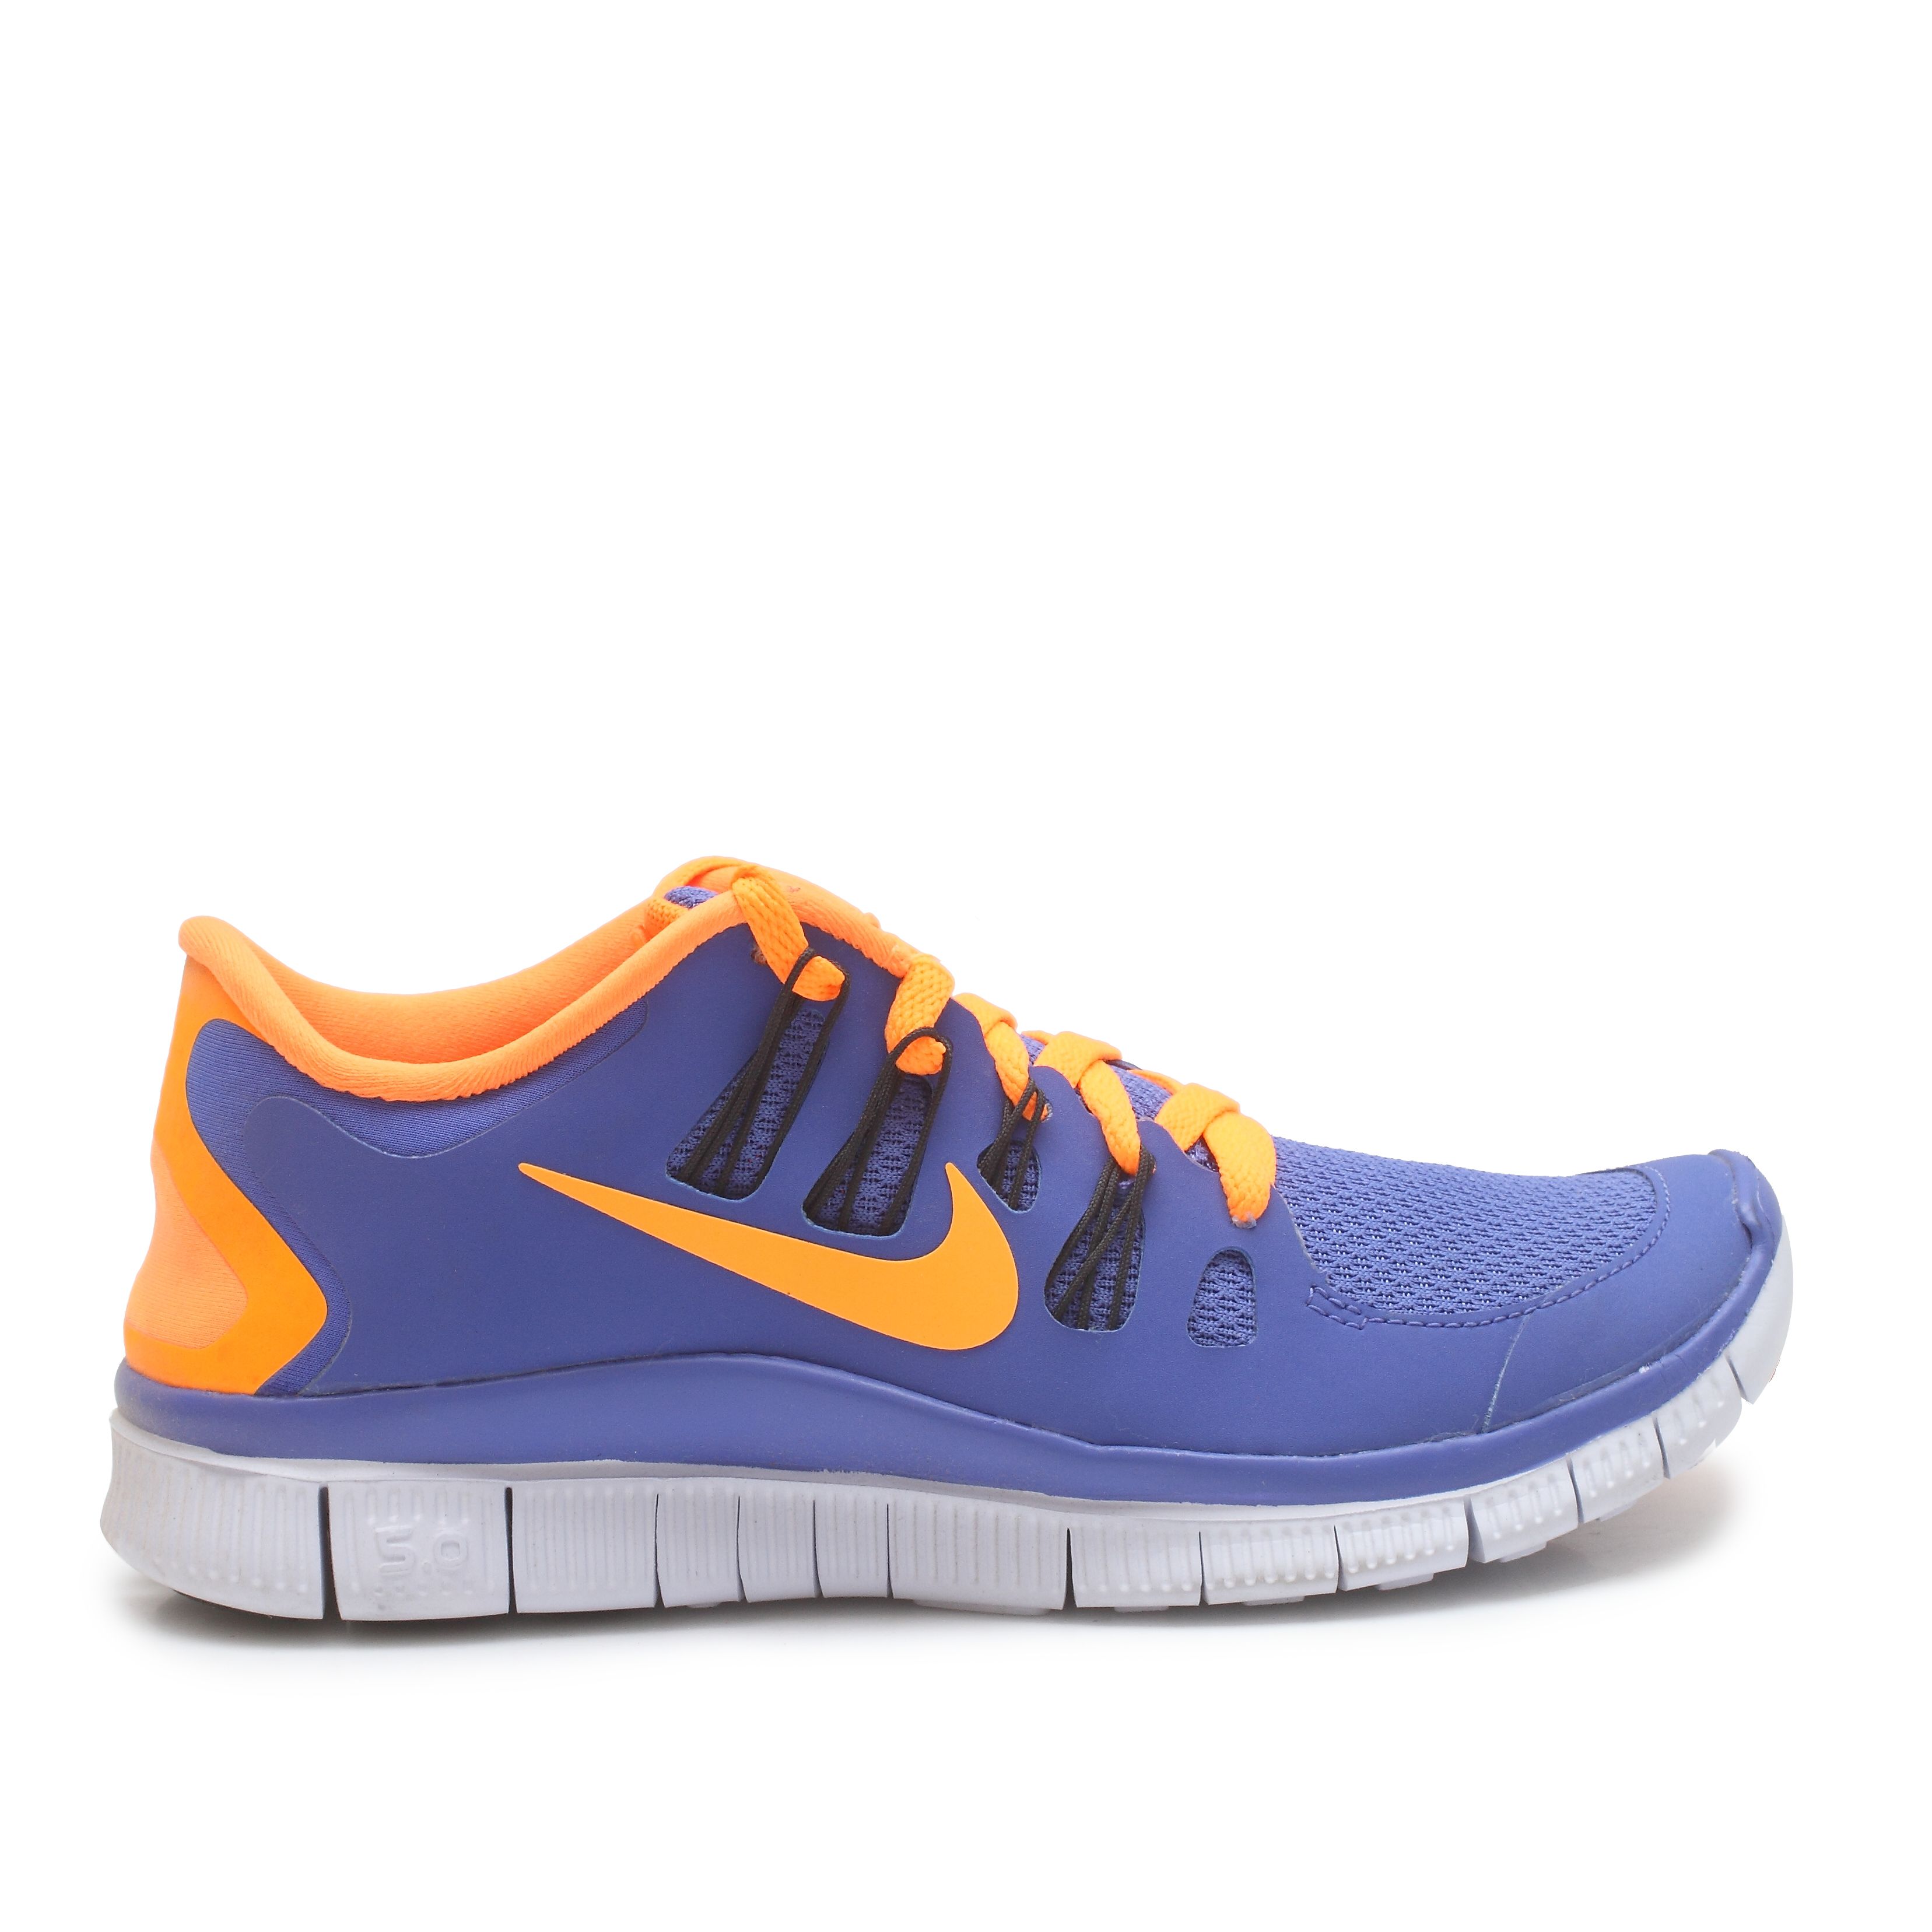 Nike Multi Color Casual Shoes Price in India- Buy Nike Multi Color Casual Shoes Online at Snapdeal